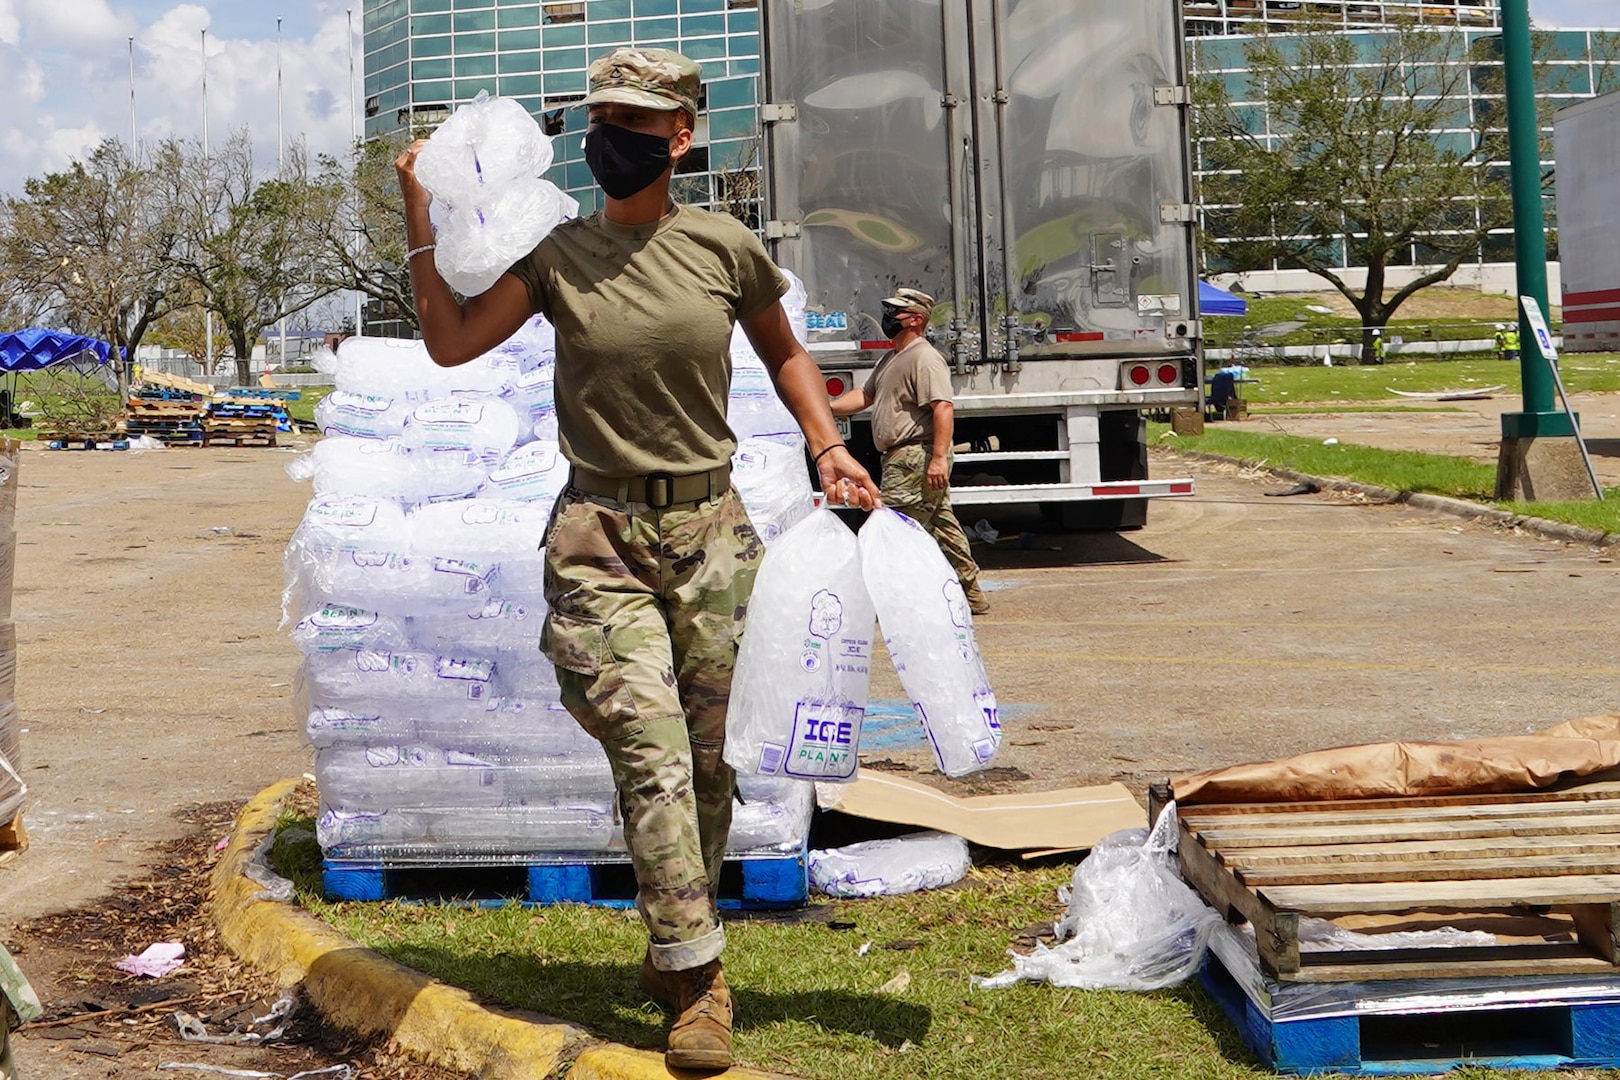 Louisiana National Guard Pfc. Reion Jones with the 1-141st Field Artillery Battalion, 256th Infantry Brigade Combat Team, hauls ice to a citizen's vehicle while working at a distribution site following Hurricane Laura in Lake Charles, Louisiana, Sept. 4, 2020.